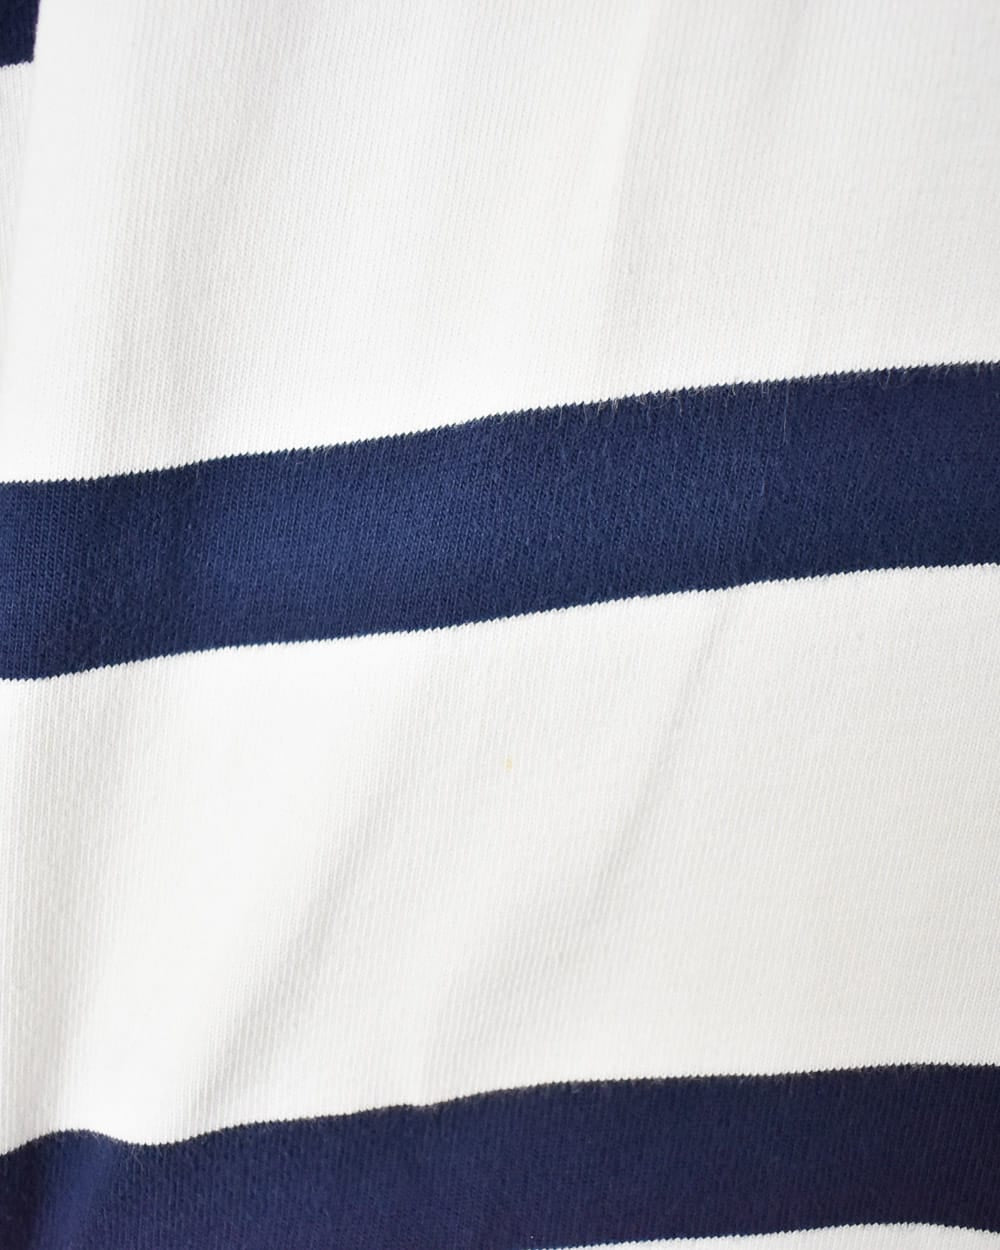 White Polo Ralph Lauren Striped Rugby Shirt - Small